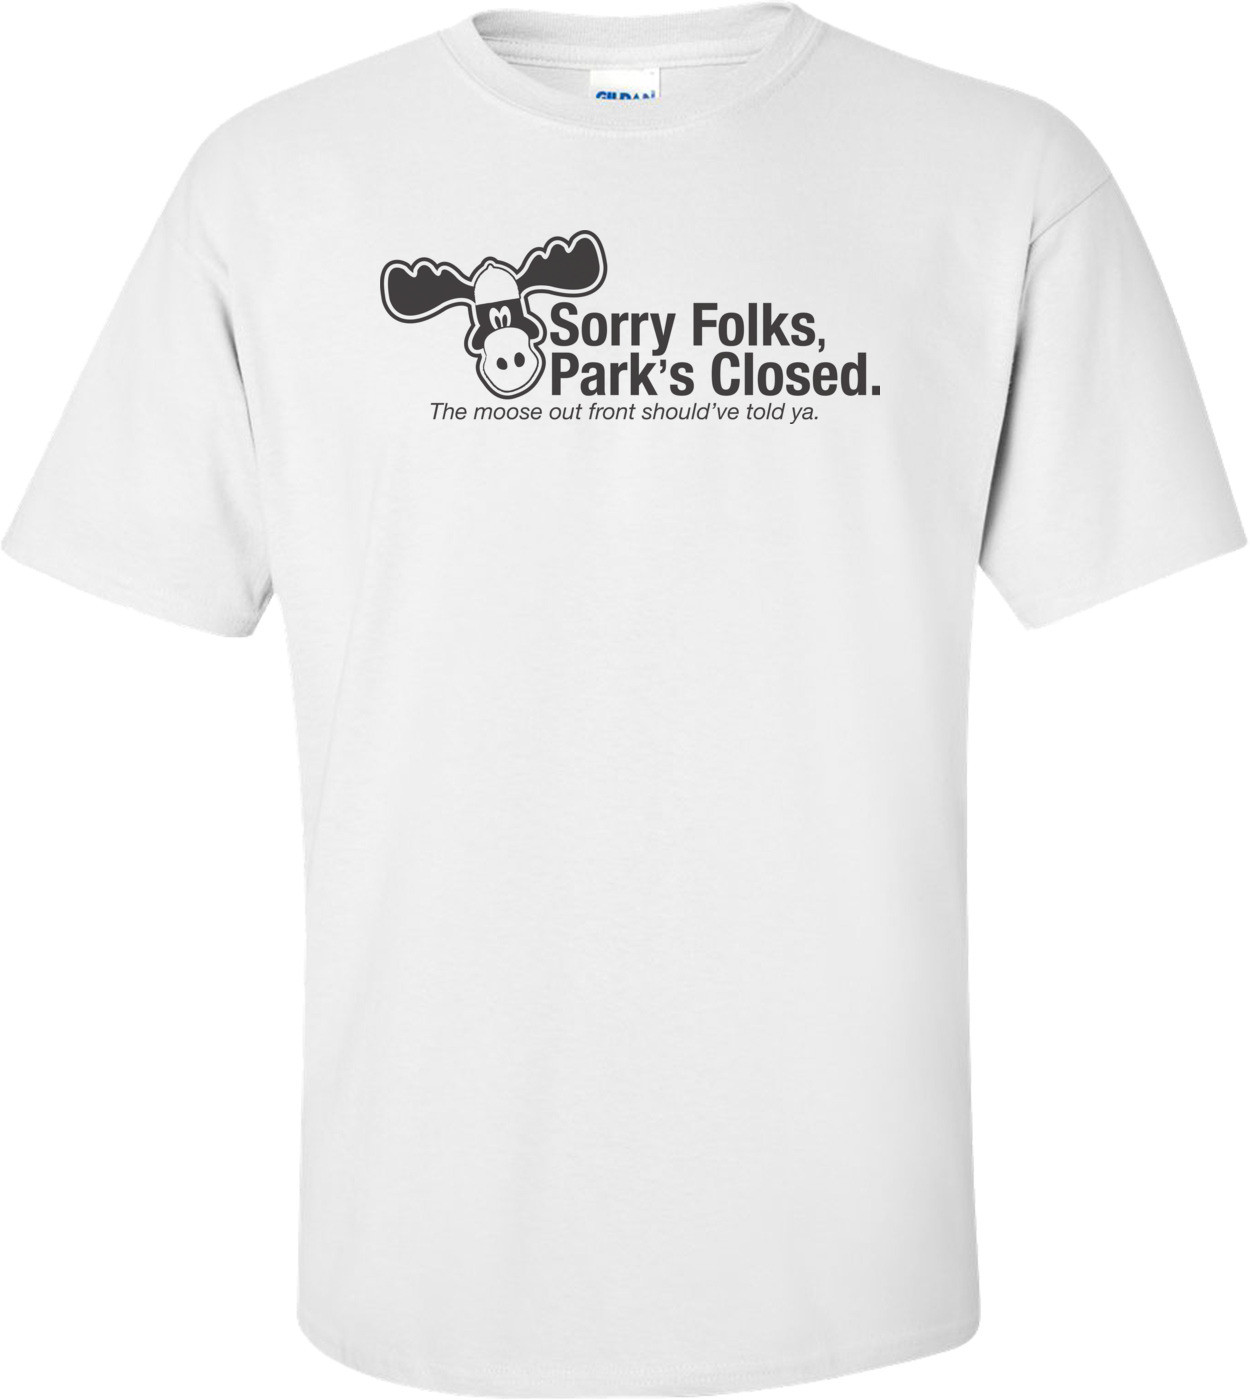 Sorry Folks Park's Closed National Lampoon's Vacation T-shirt